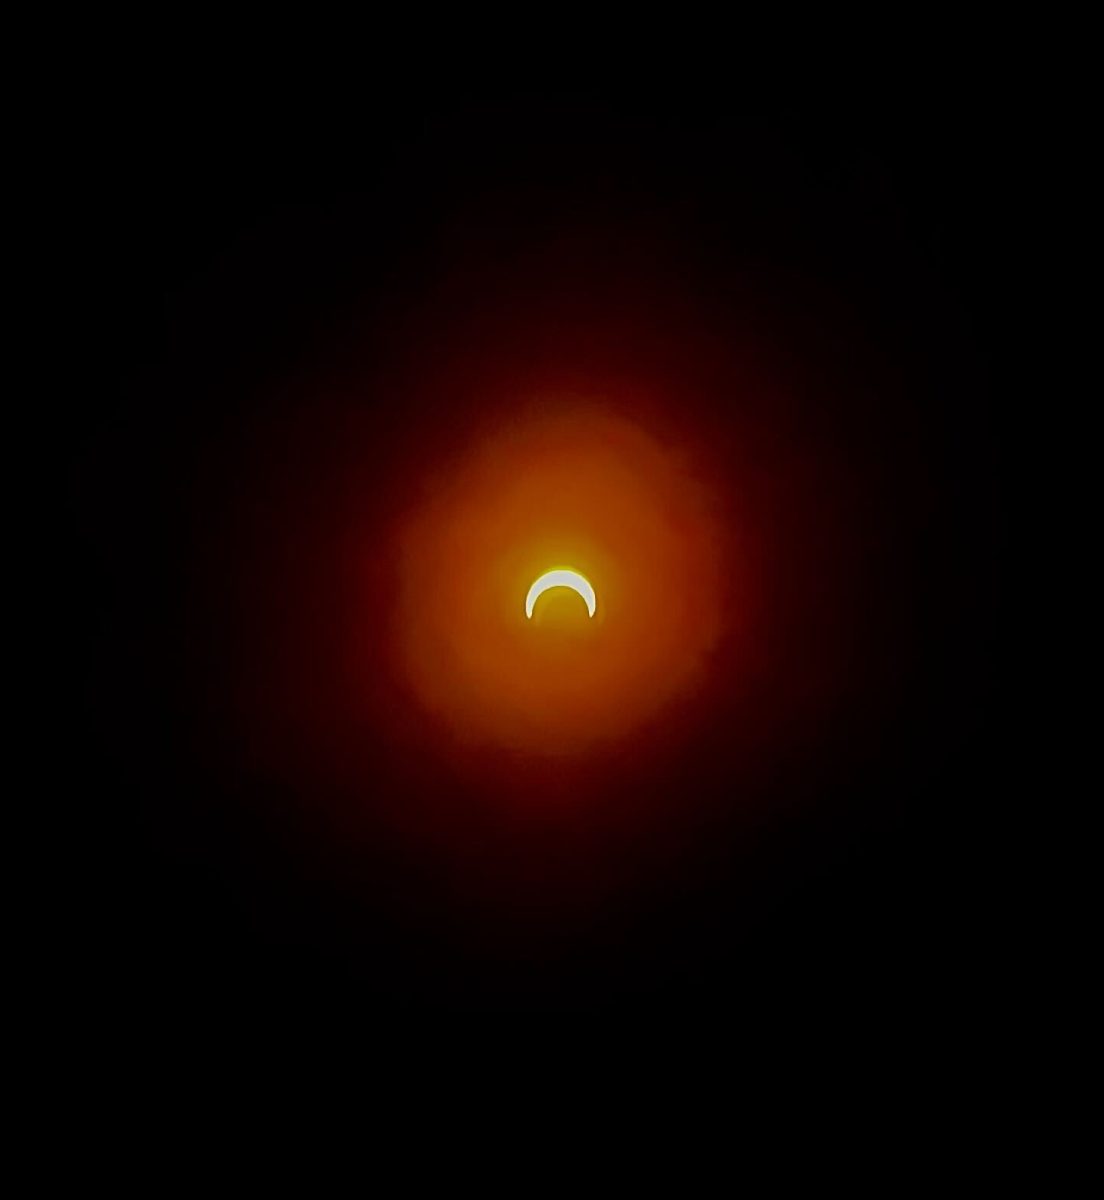 The ring of fire eclipse caused the sun to appear black in the middle with a bright glowing ring around it. Many Austin residents observed the eclipse from right outside their homes.